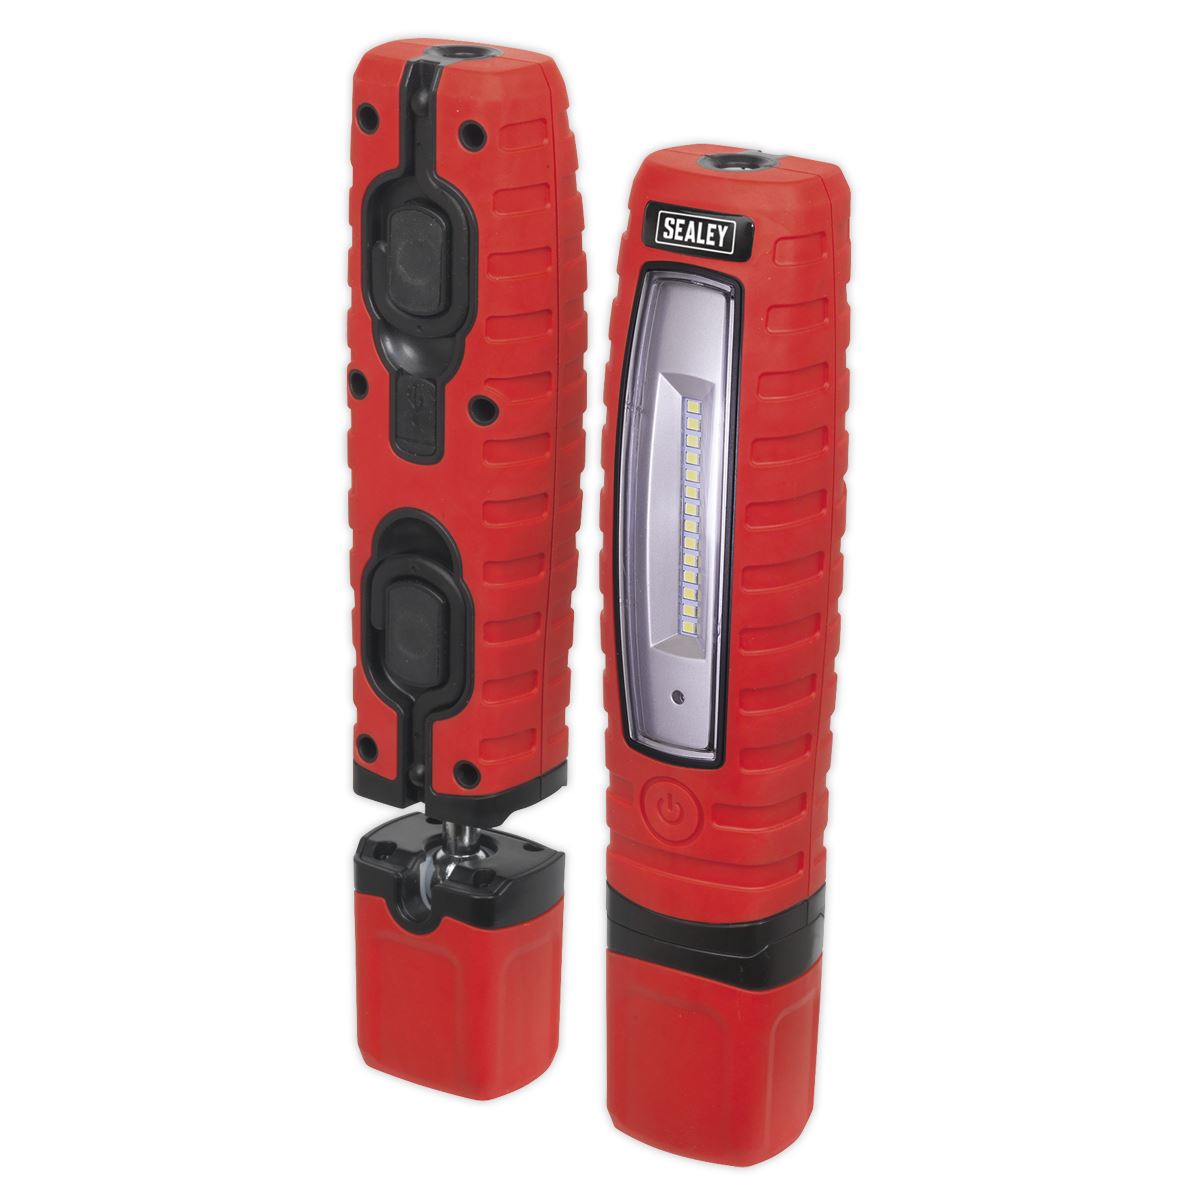 Sealey Rechargeable 360° Inspection Light 8W & 3W SMD LED Red Lithium-ion